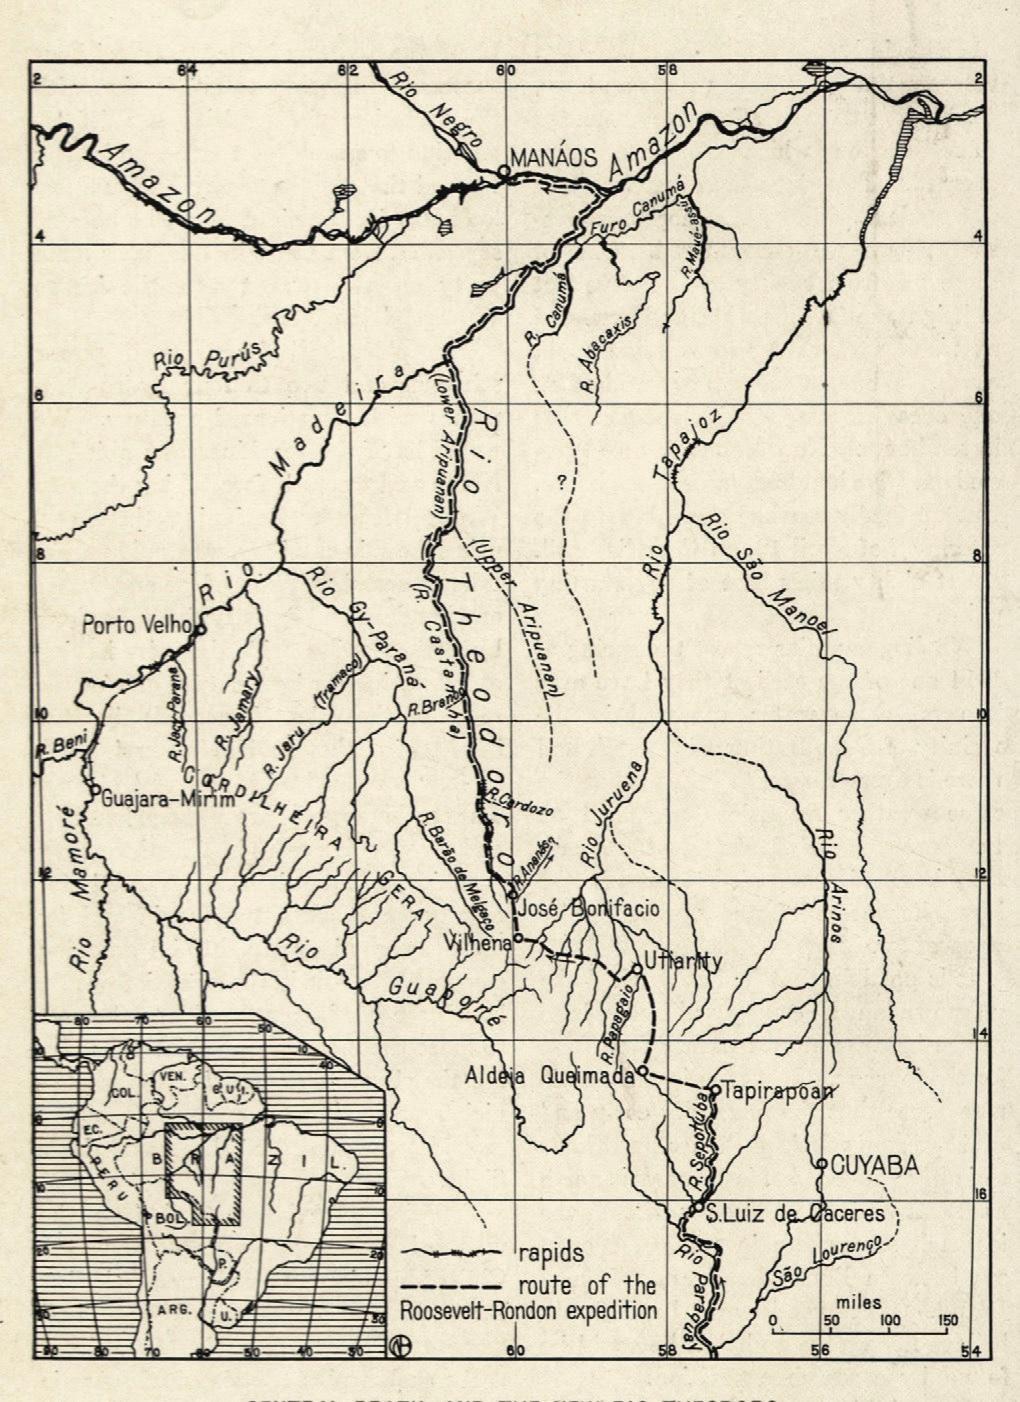 A map of central Brazil and the Roosevelt River (formerly called River of Doubt). (Public Domain)